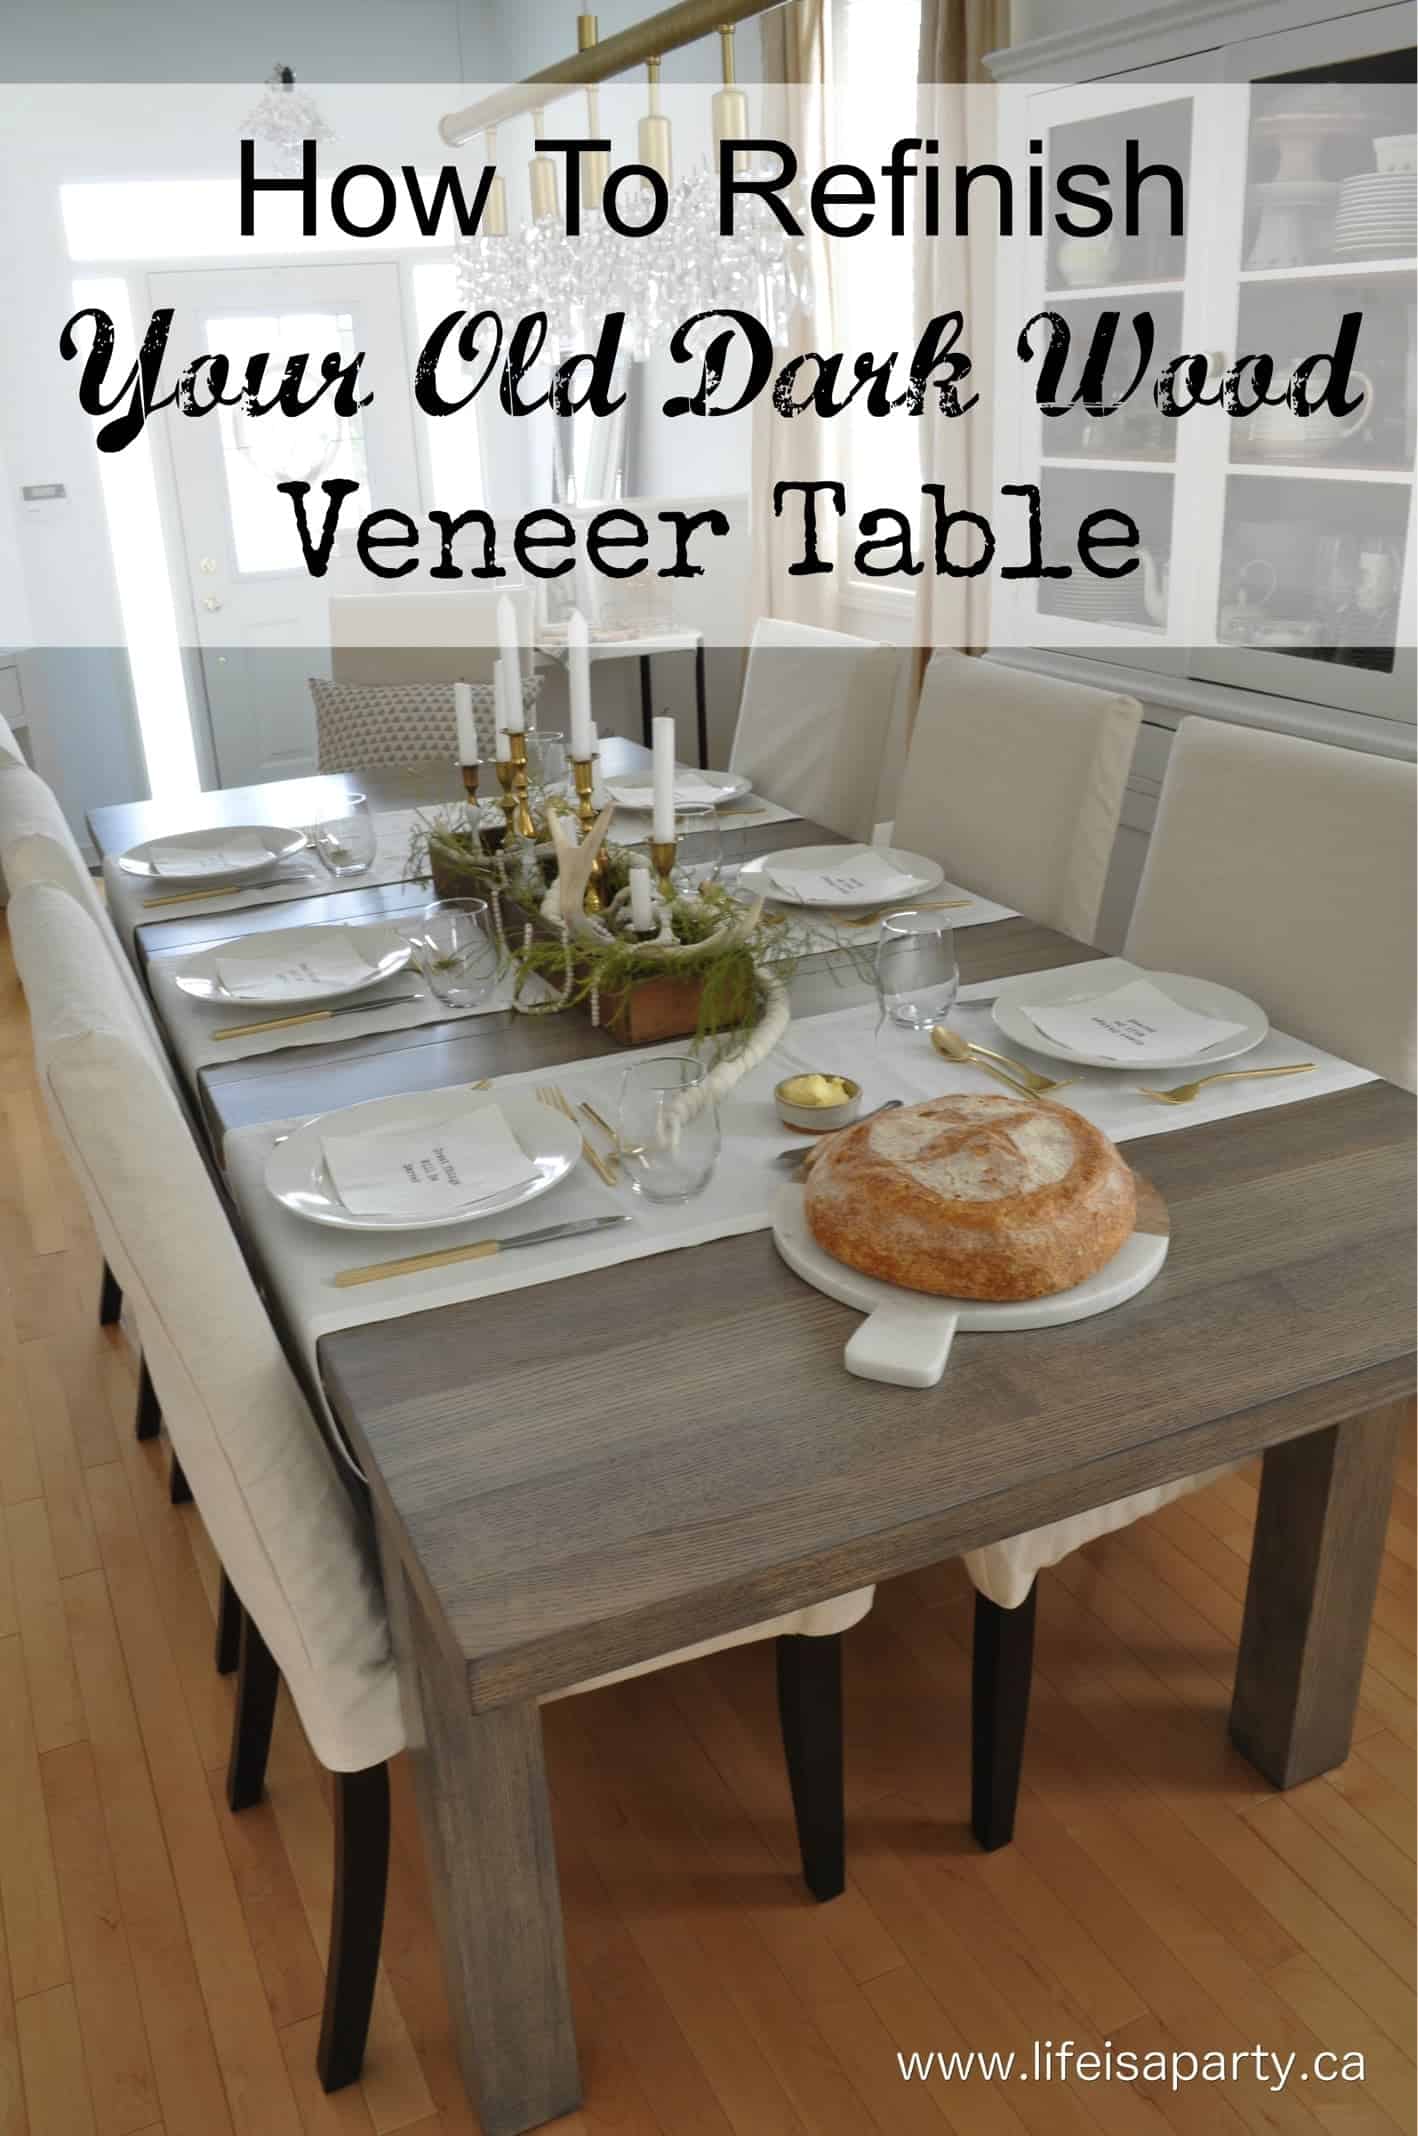 How To Refinish A Dark Wood Veneer Dining Room Table - How To Sand And Refinish Table